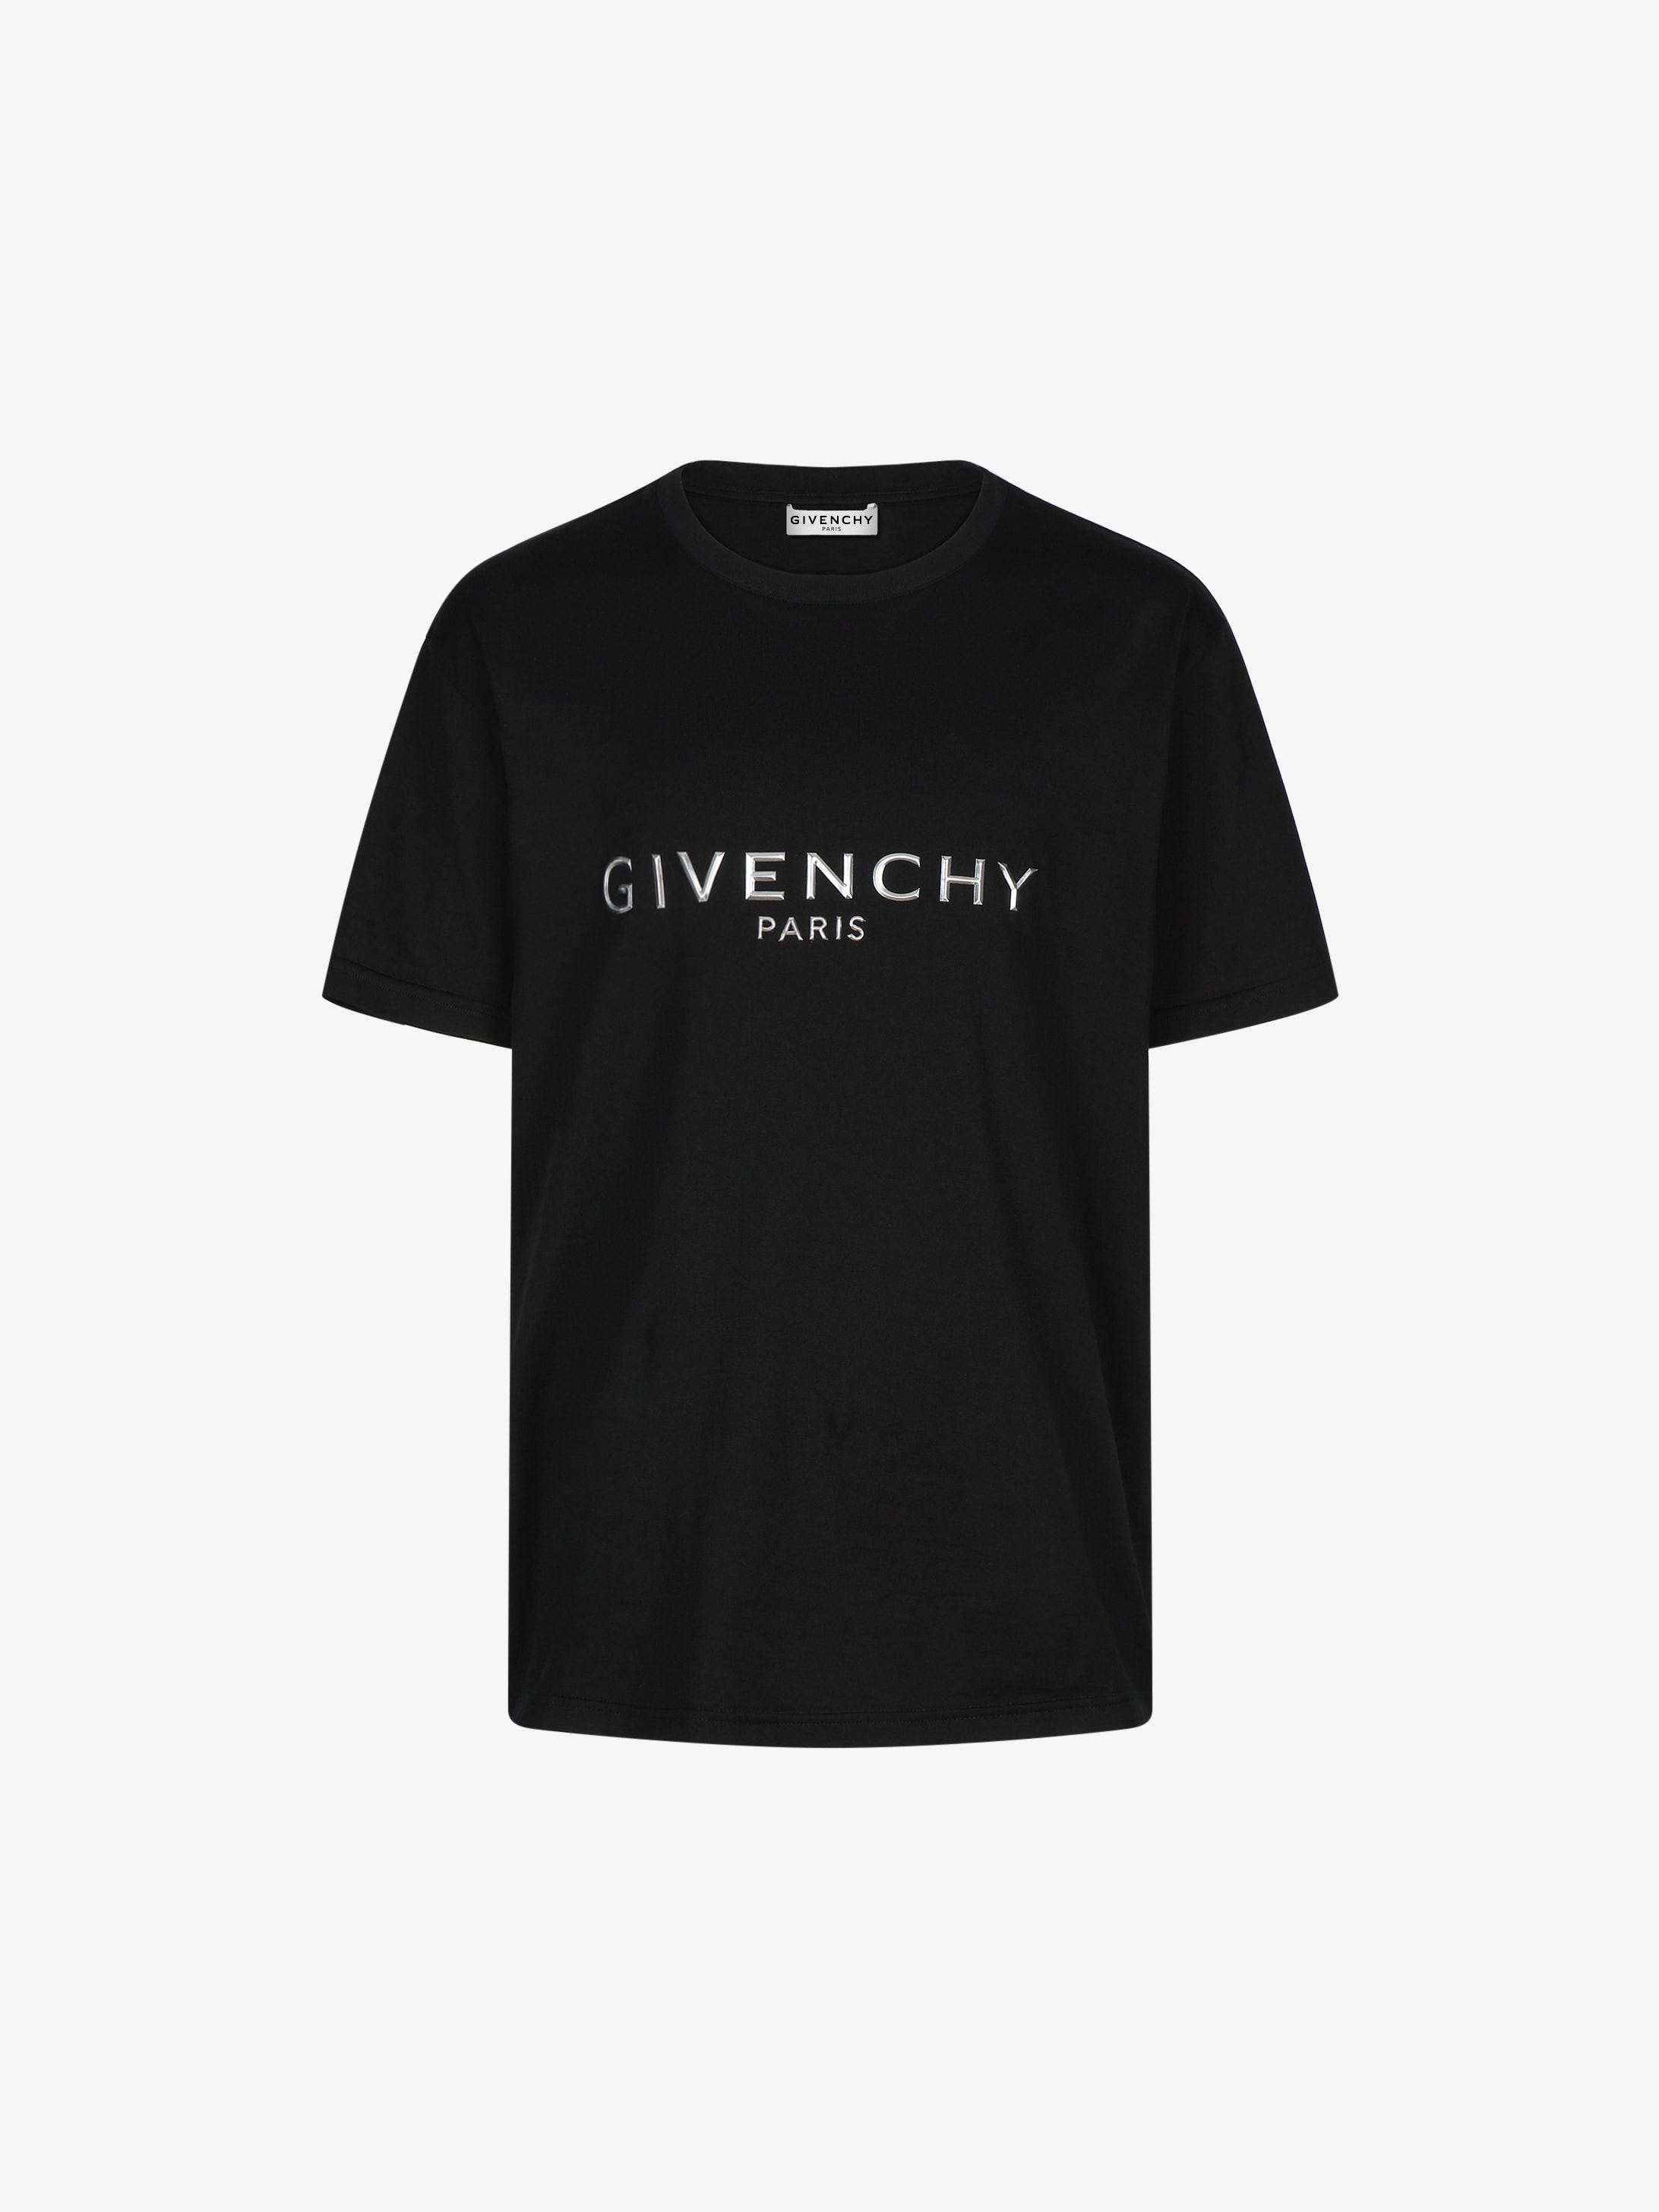 GIVENCHY PARIS embossed t-shirt 